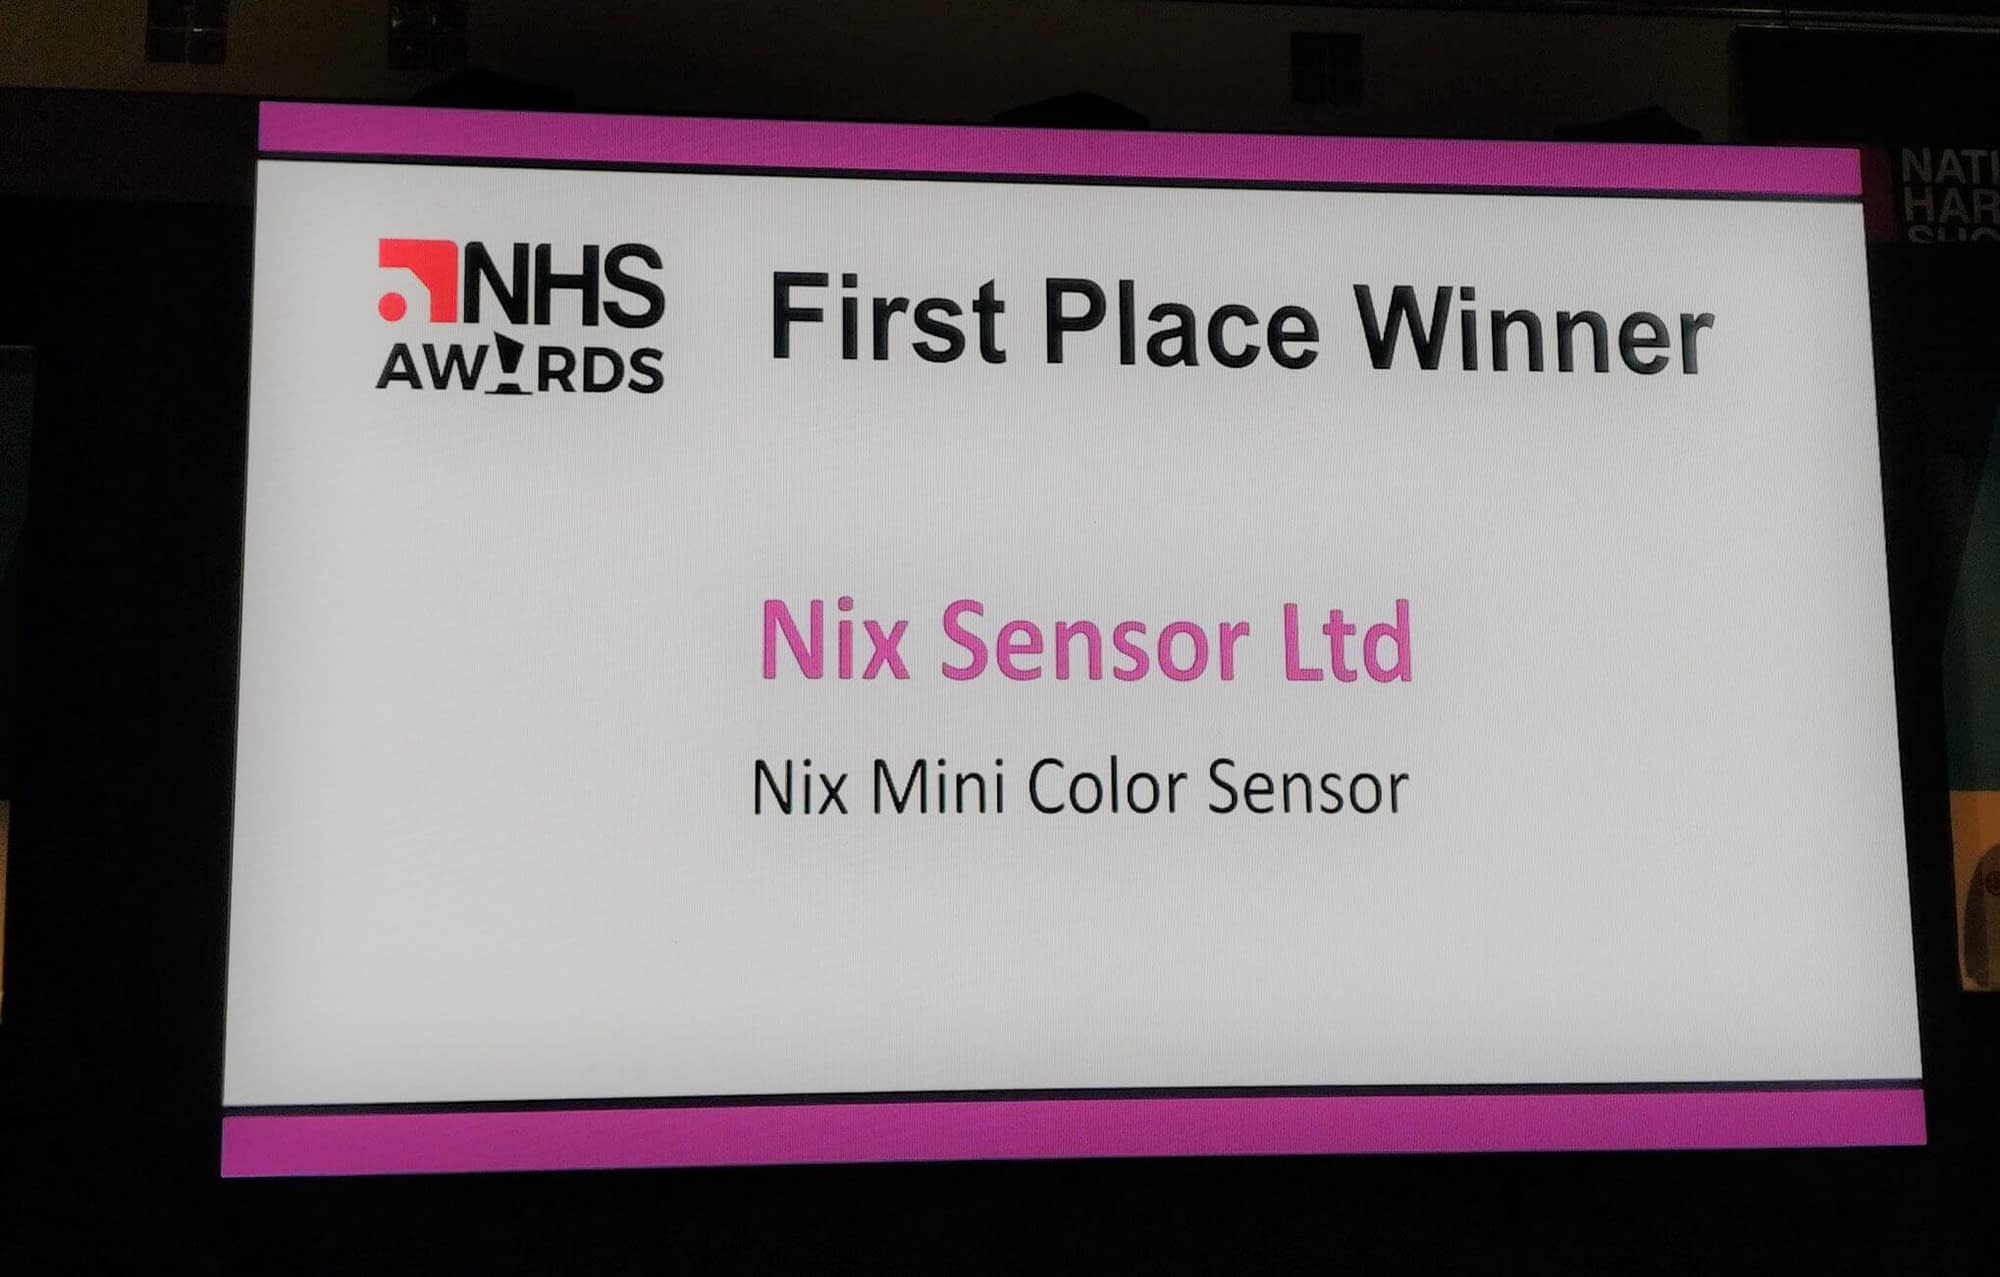 Nix Sensor Ltd. as first place winner for the New Product Launch Award